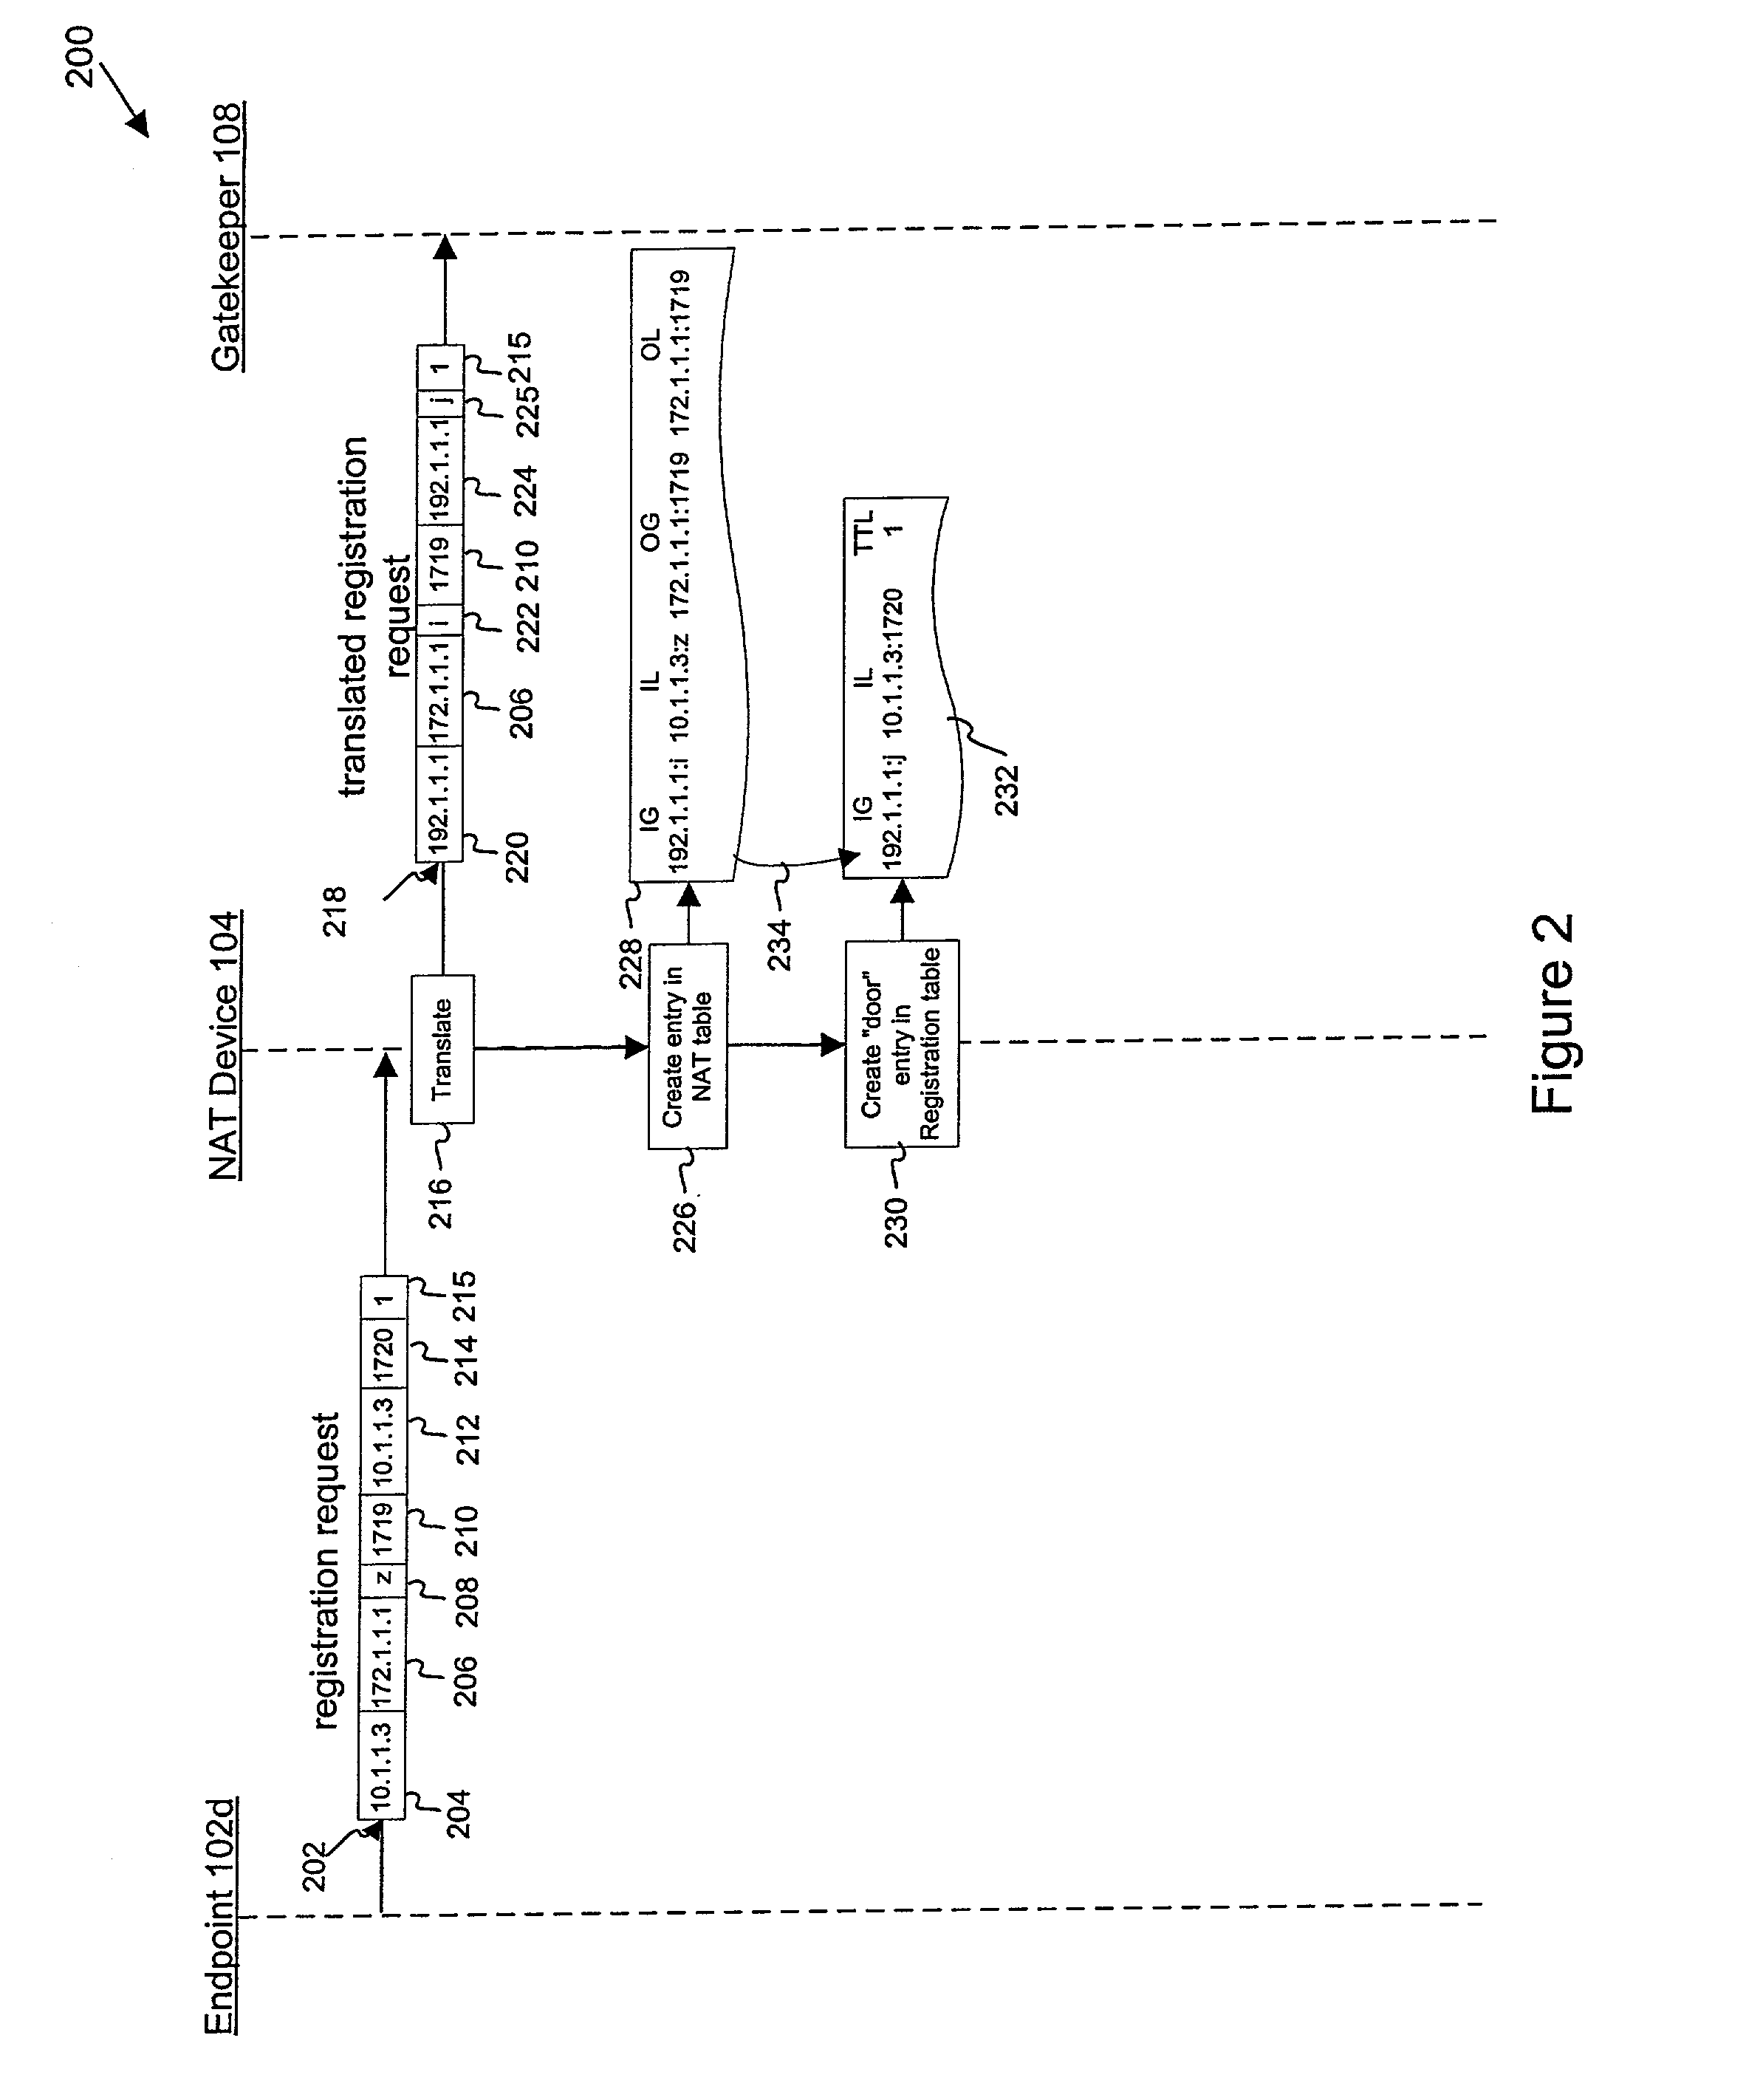 Apparatus and methods for maintaining the registration state of an IP device in a network address port translation (NAPT) environment